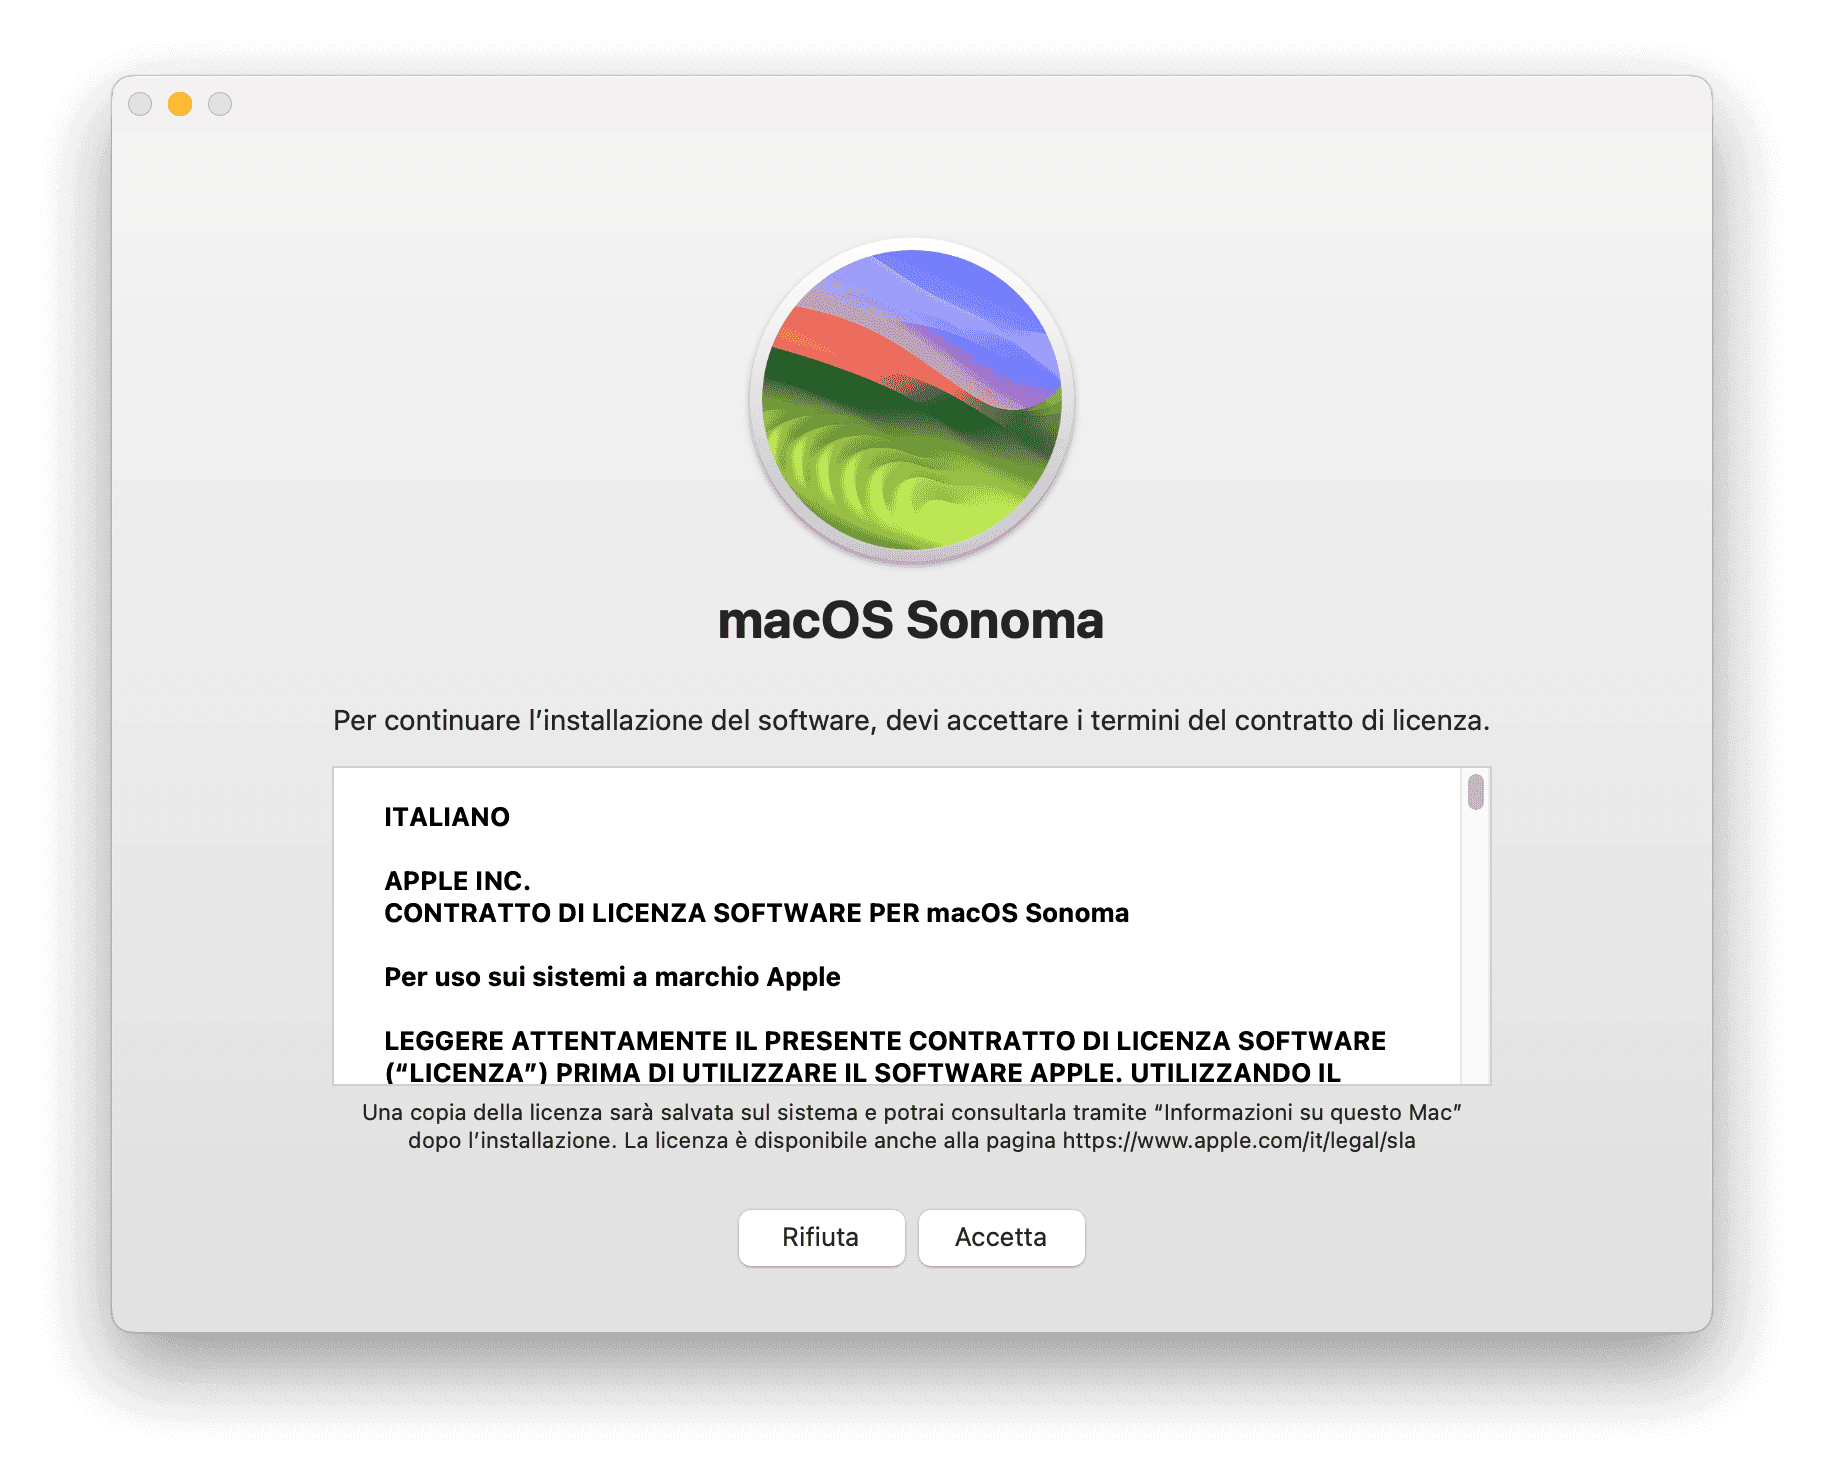 install-macos-sonoma-it.png